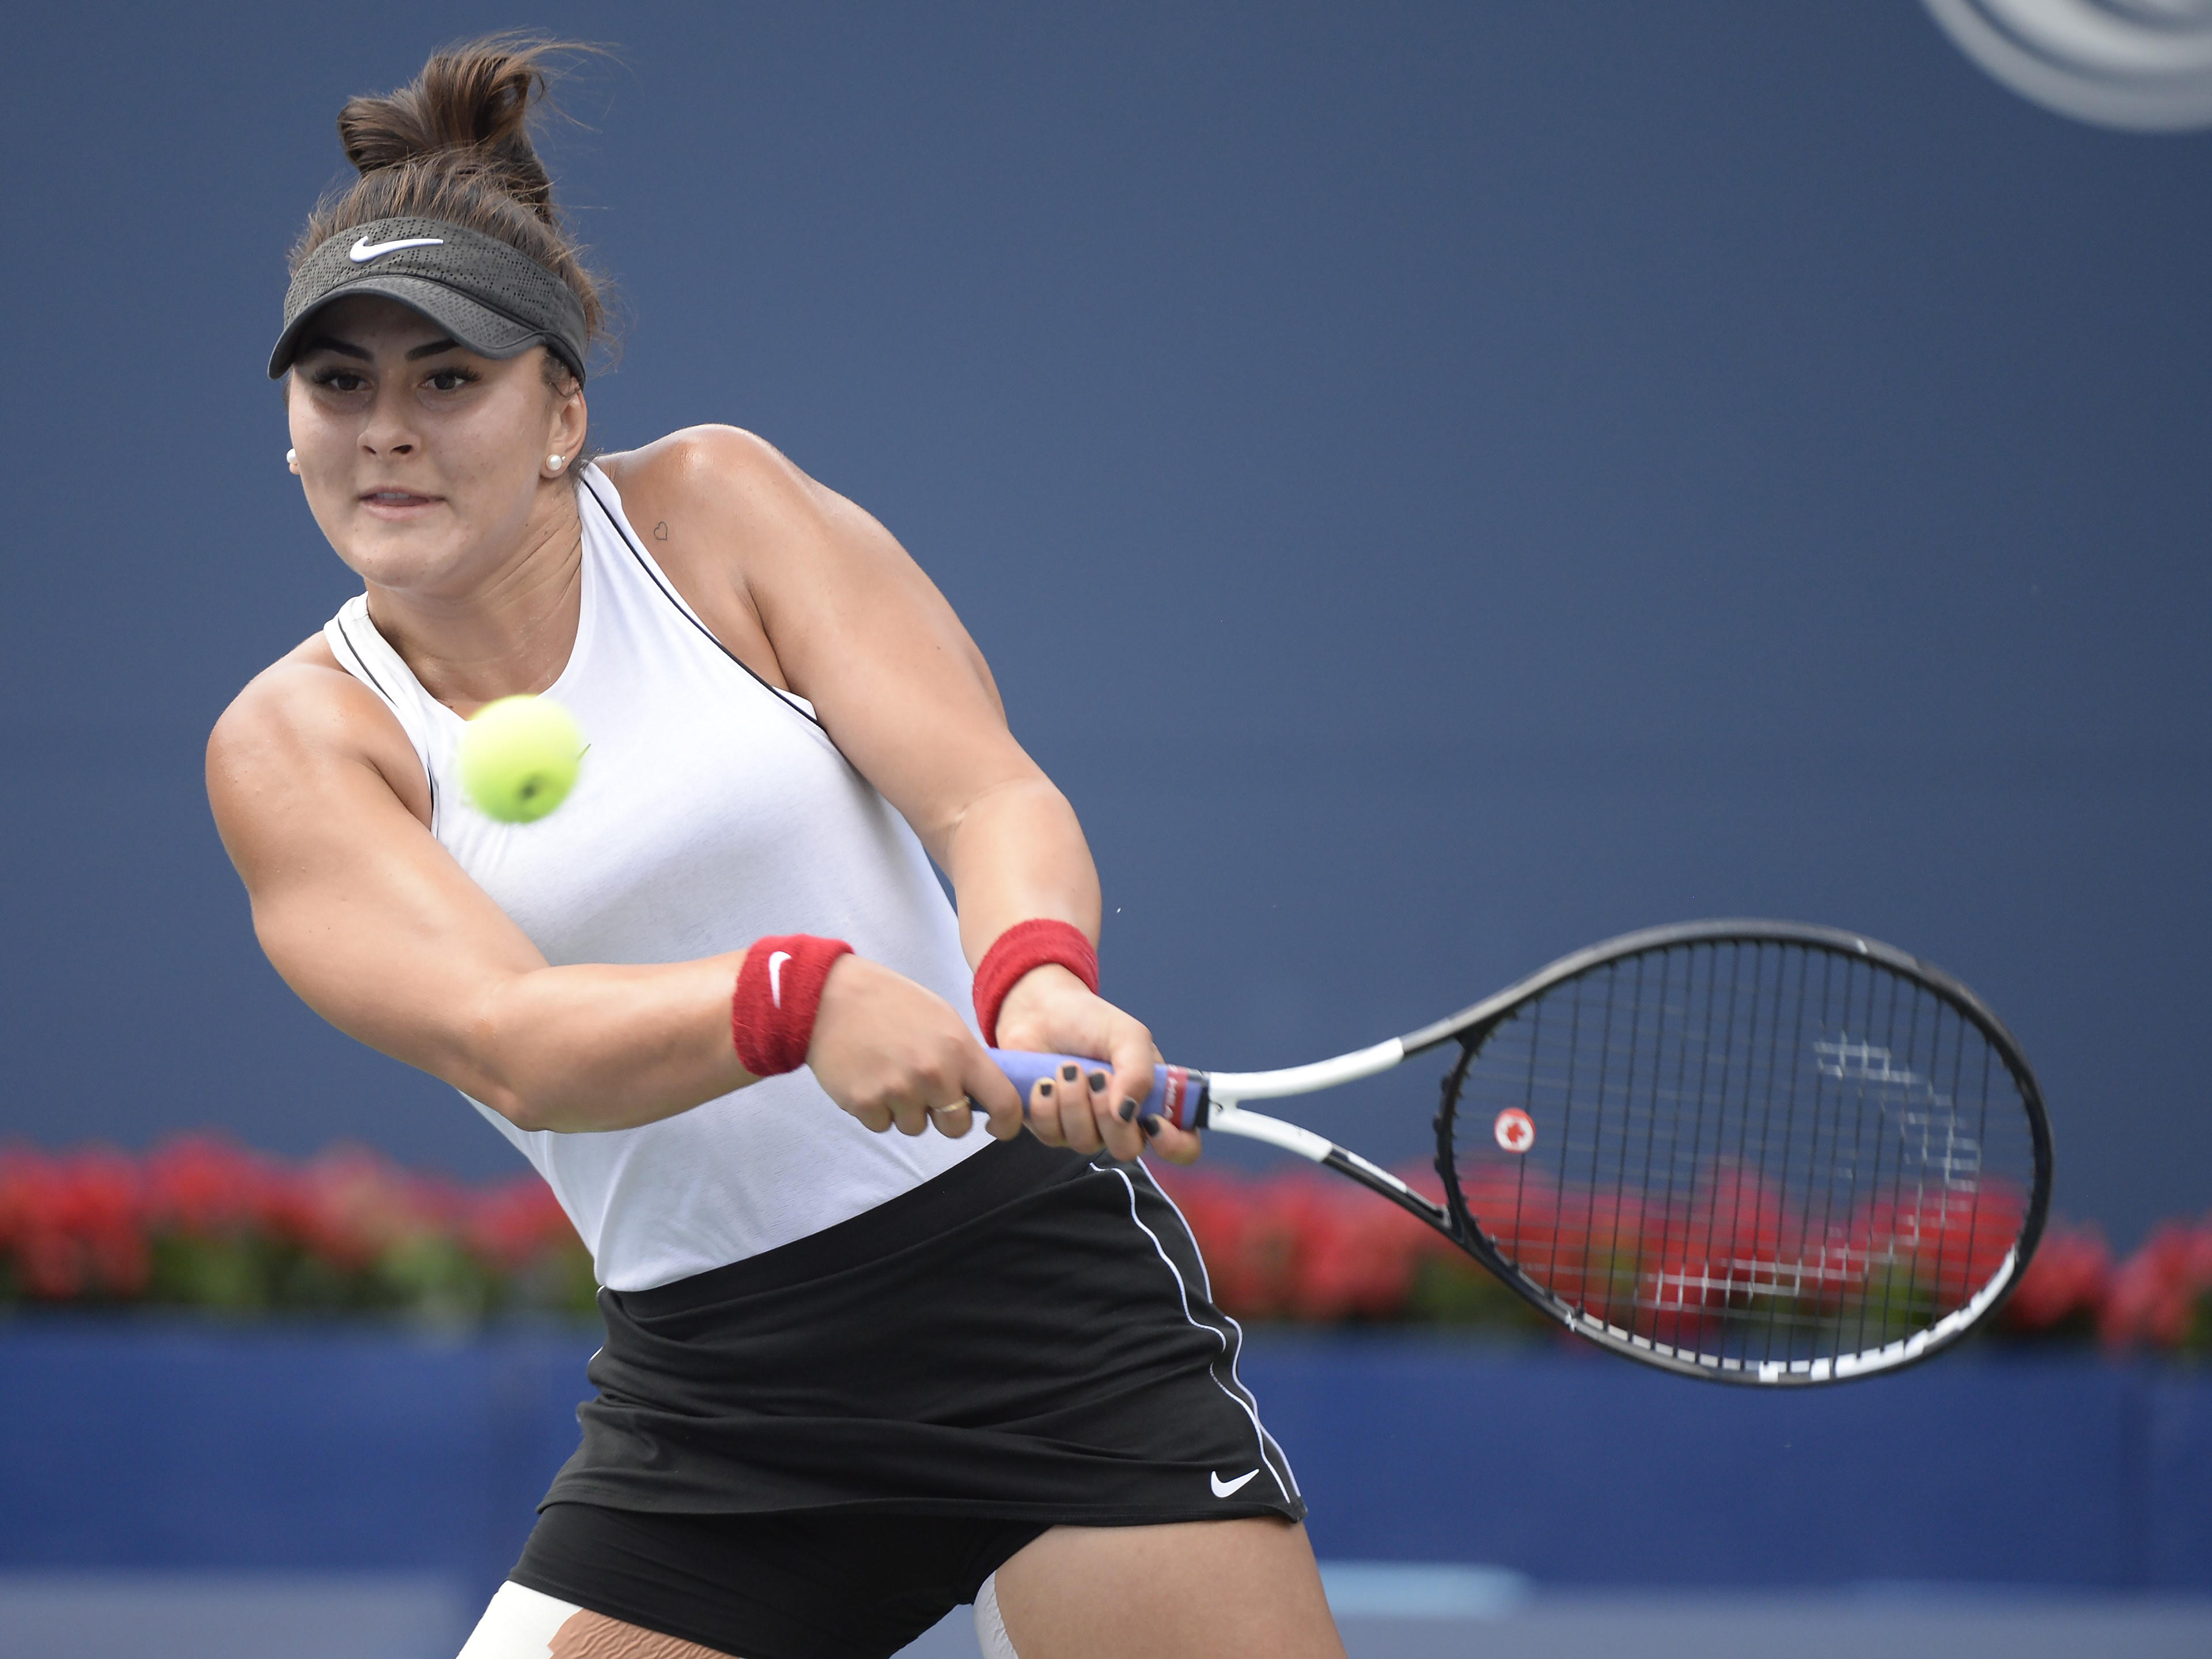 Canadian teen Andreescu wins Rogers Cup, Williams retires - 660 NEWS3840 x 2880